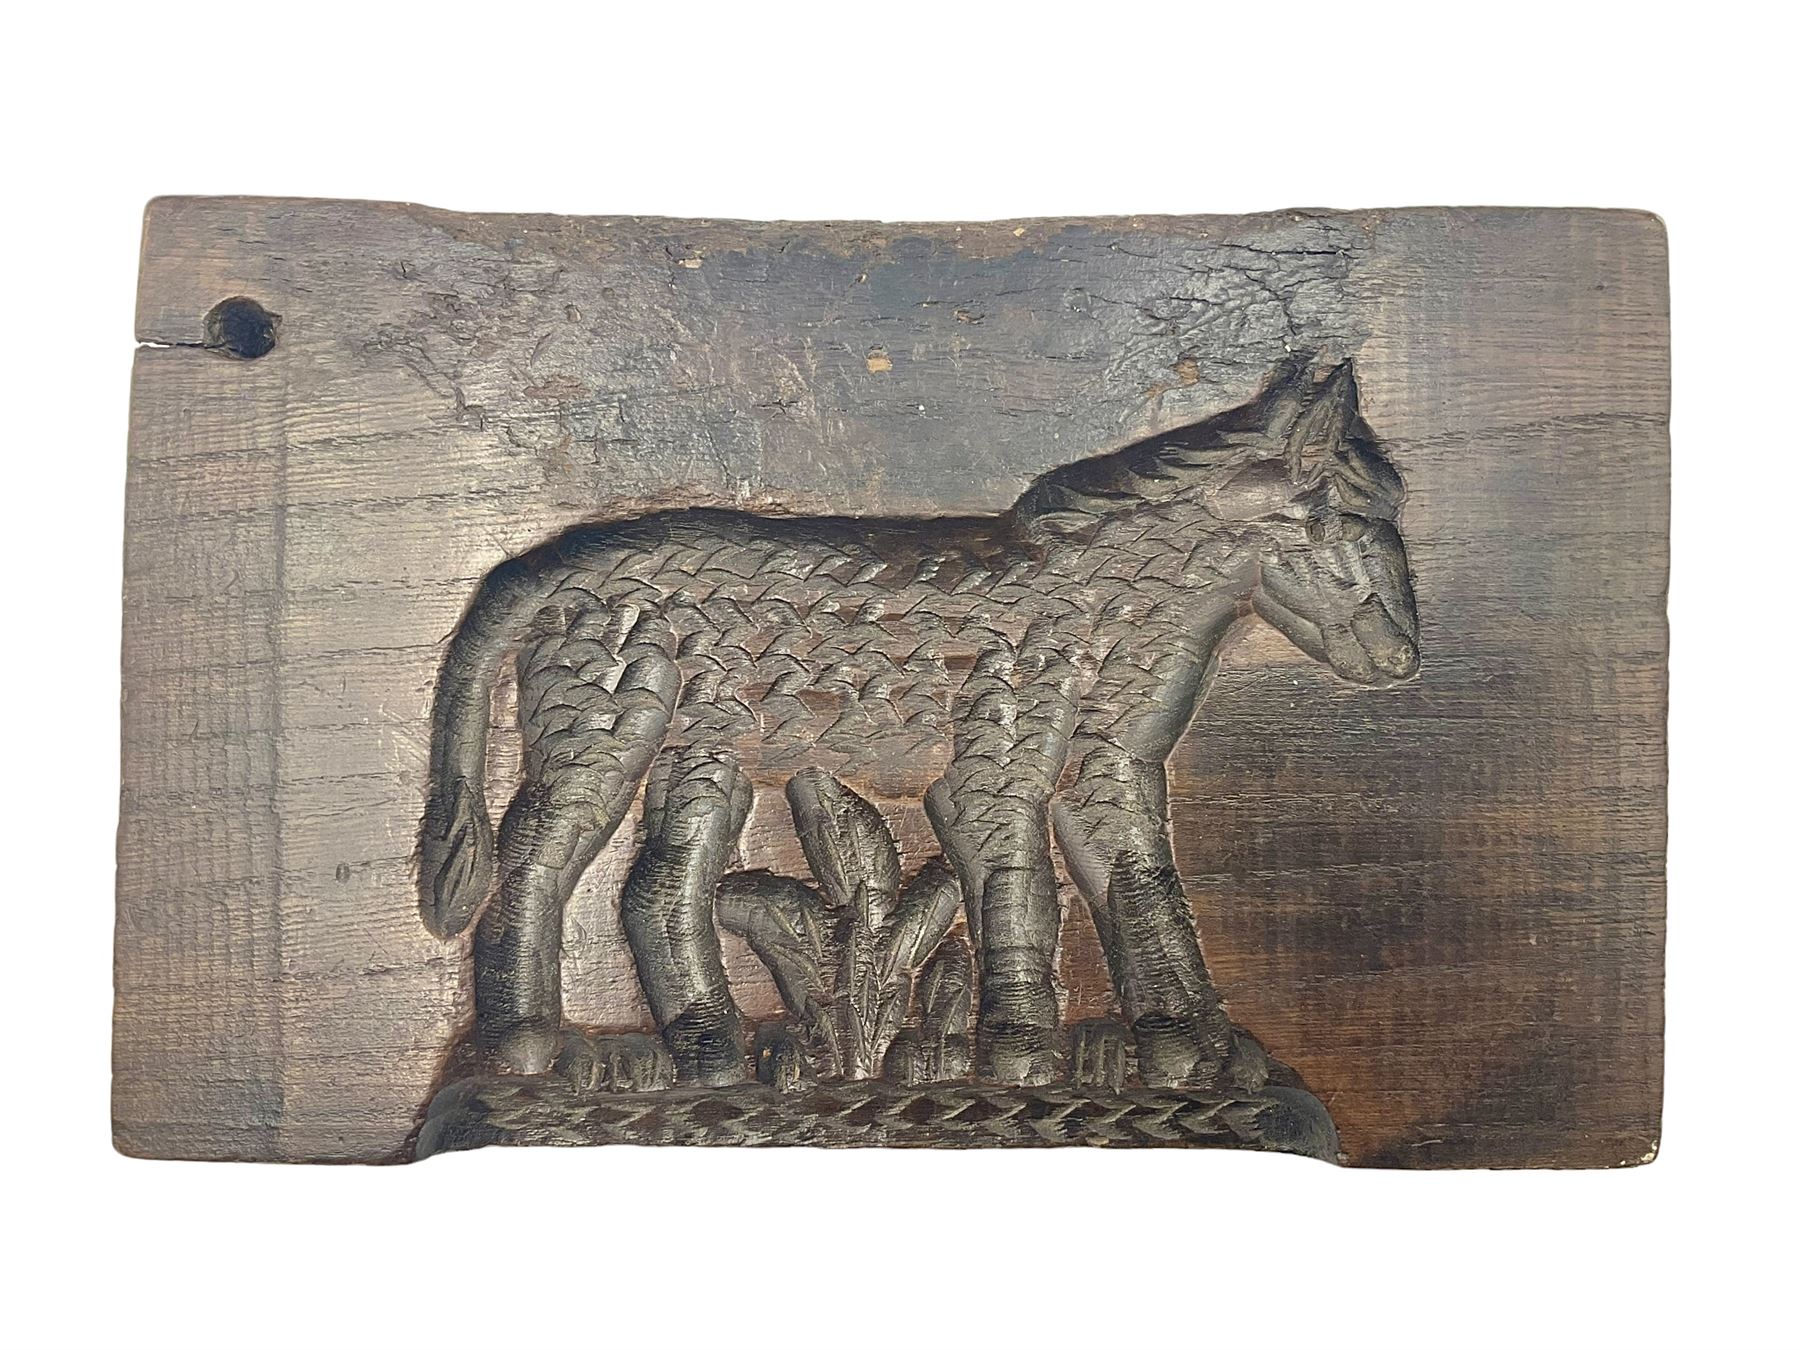 18th Century Gingerbread mould modelled as a donkey